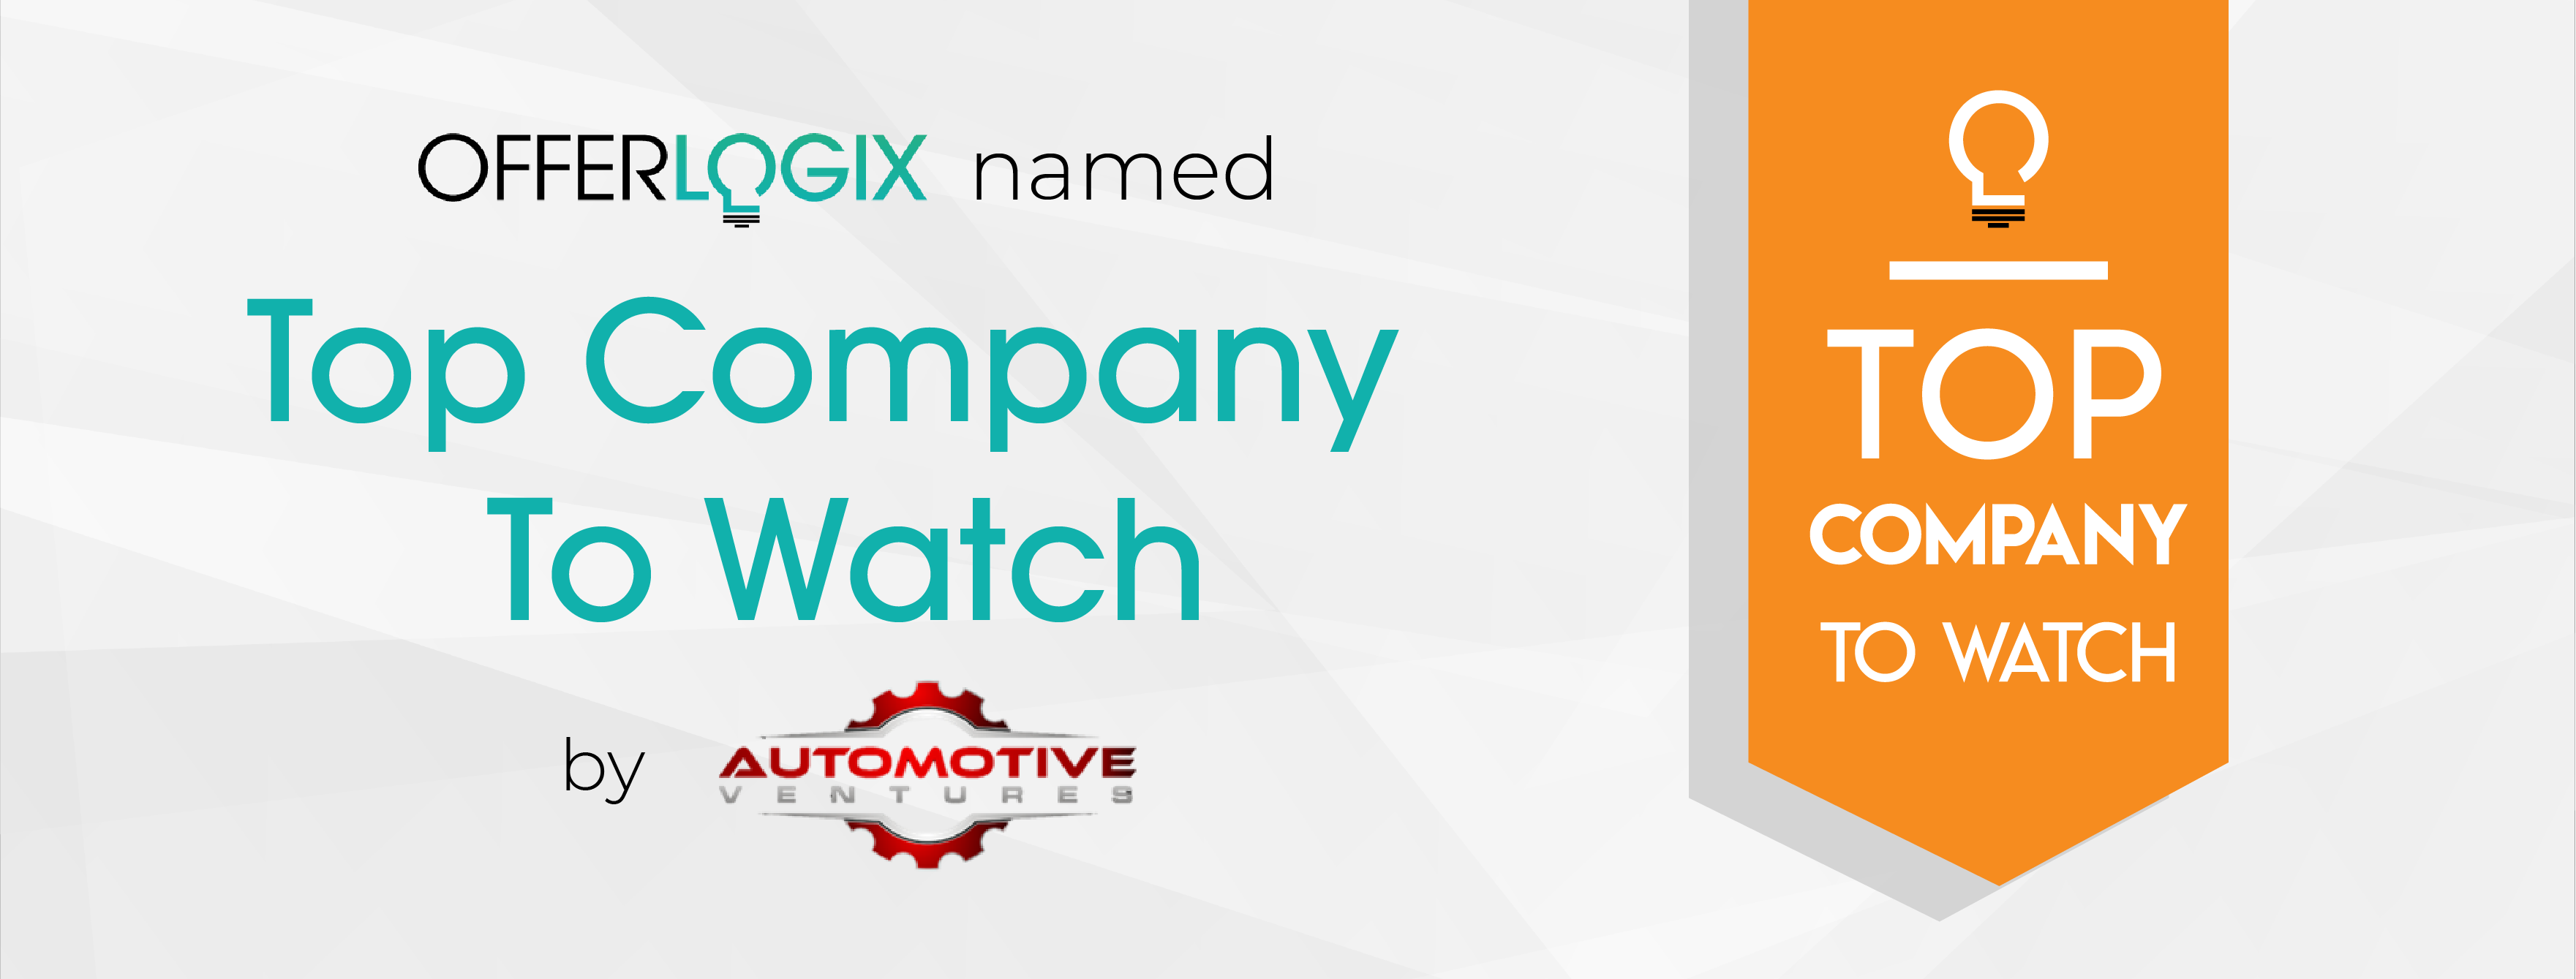 OfferLogix named a Top Company To Watch by Automotive Ventures